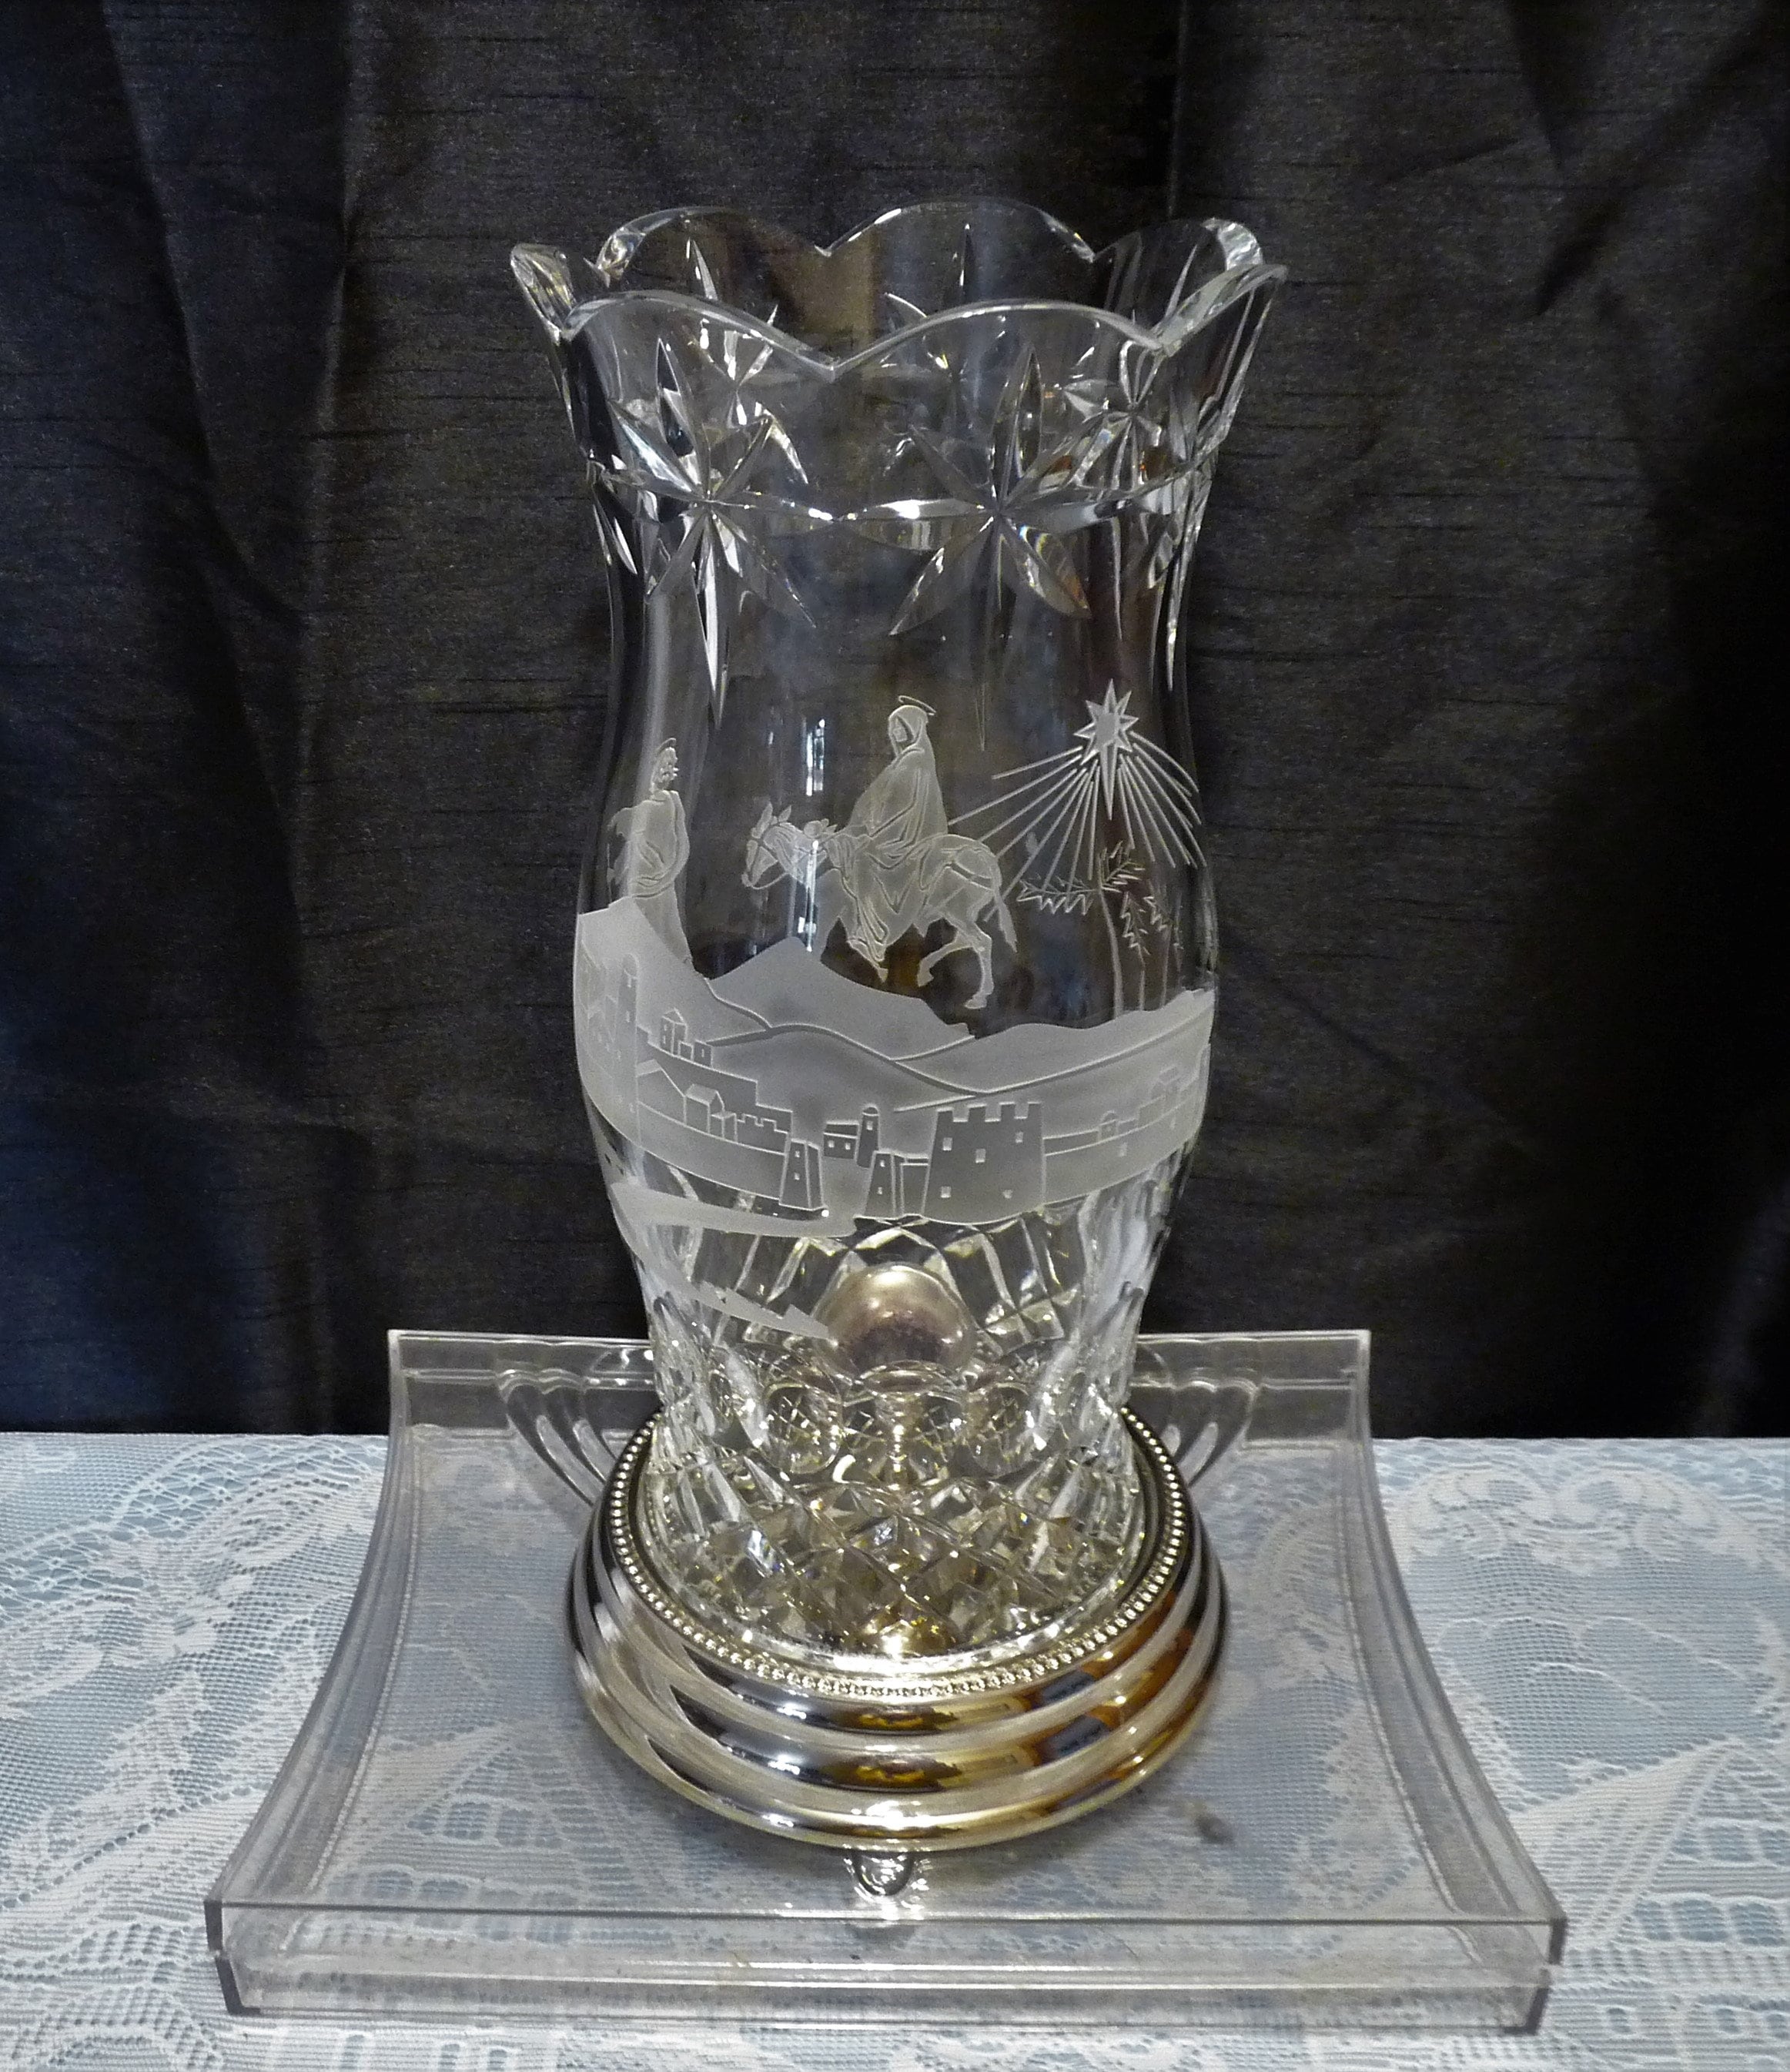 Hurricanes (2 Piece) Electric Hurricane Lamp by Waterford Crystal